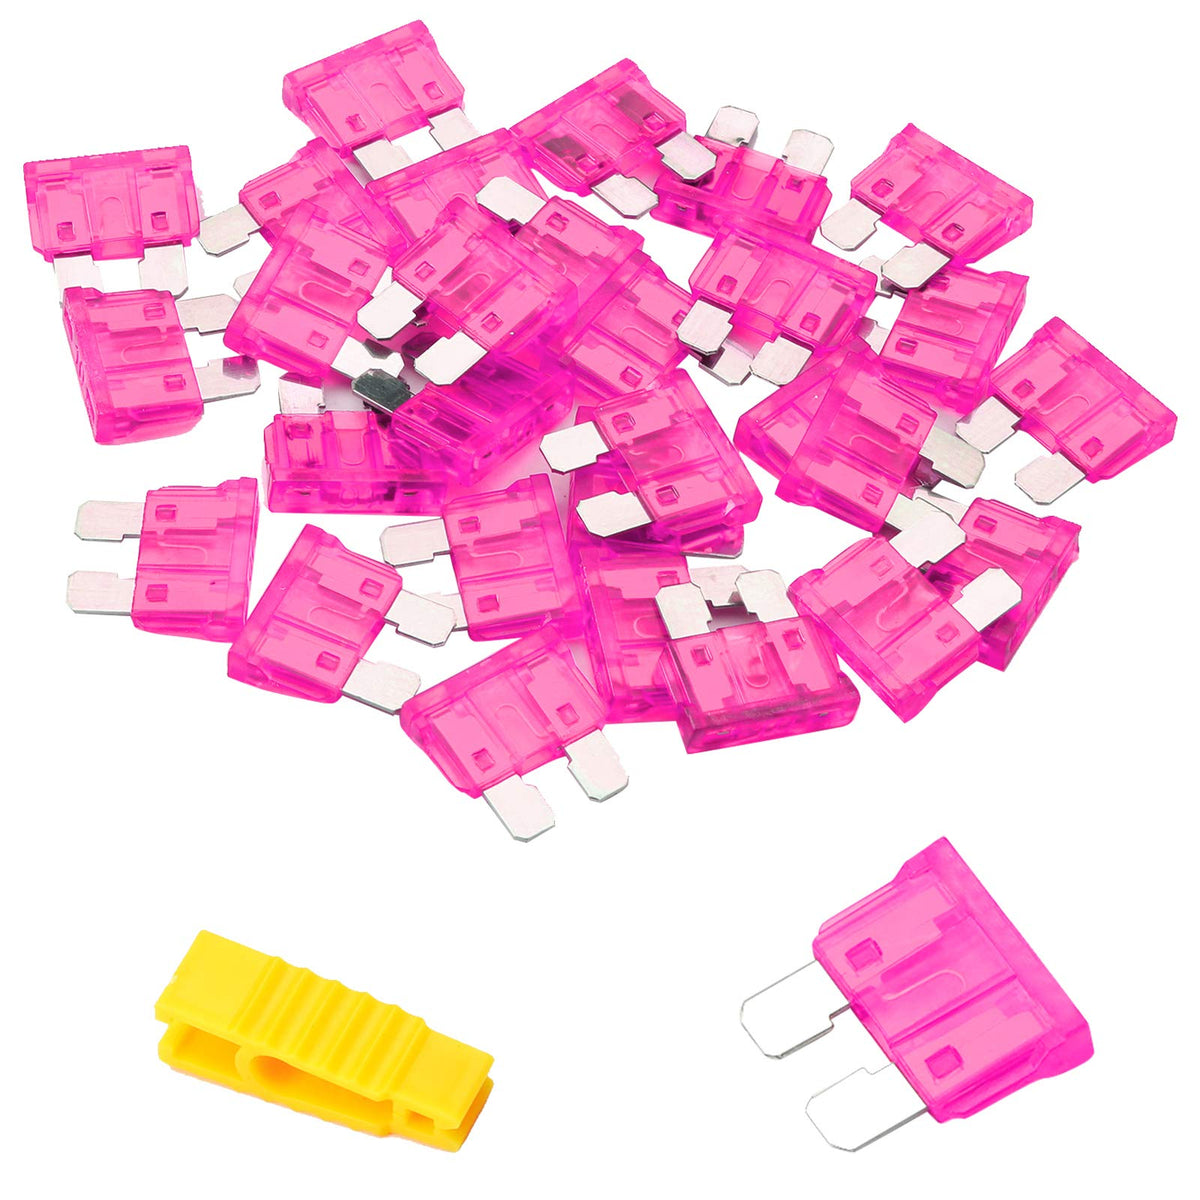 Bolatus 20Pcs Car Fuses 3A Standard Blade Fuses Automotive Replacement Fuse for Caravan Motorcycle Truck RV and Fuse Puller